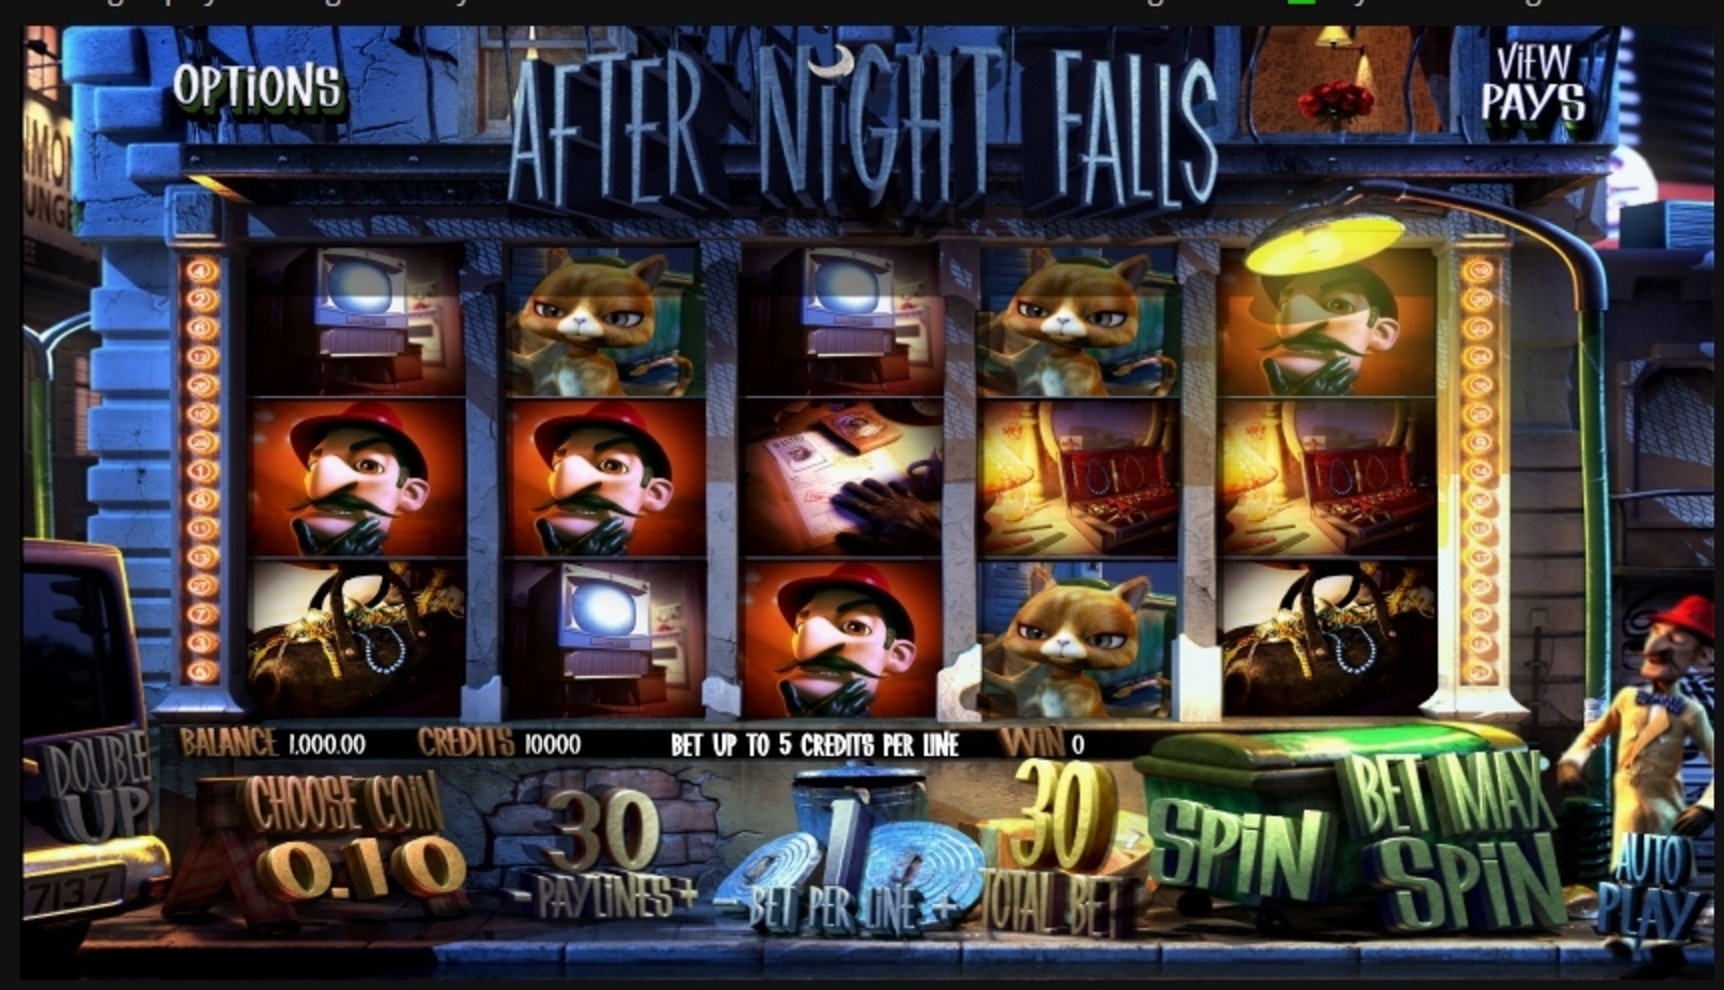 Reels in After Night Falls Slot Game by Betsoft